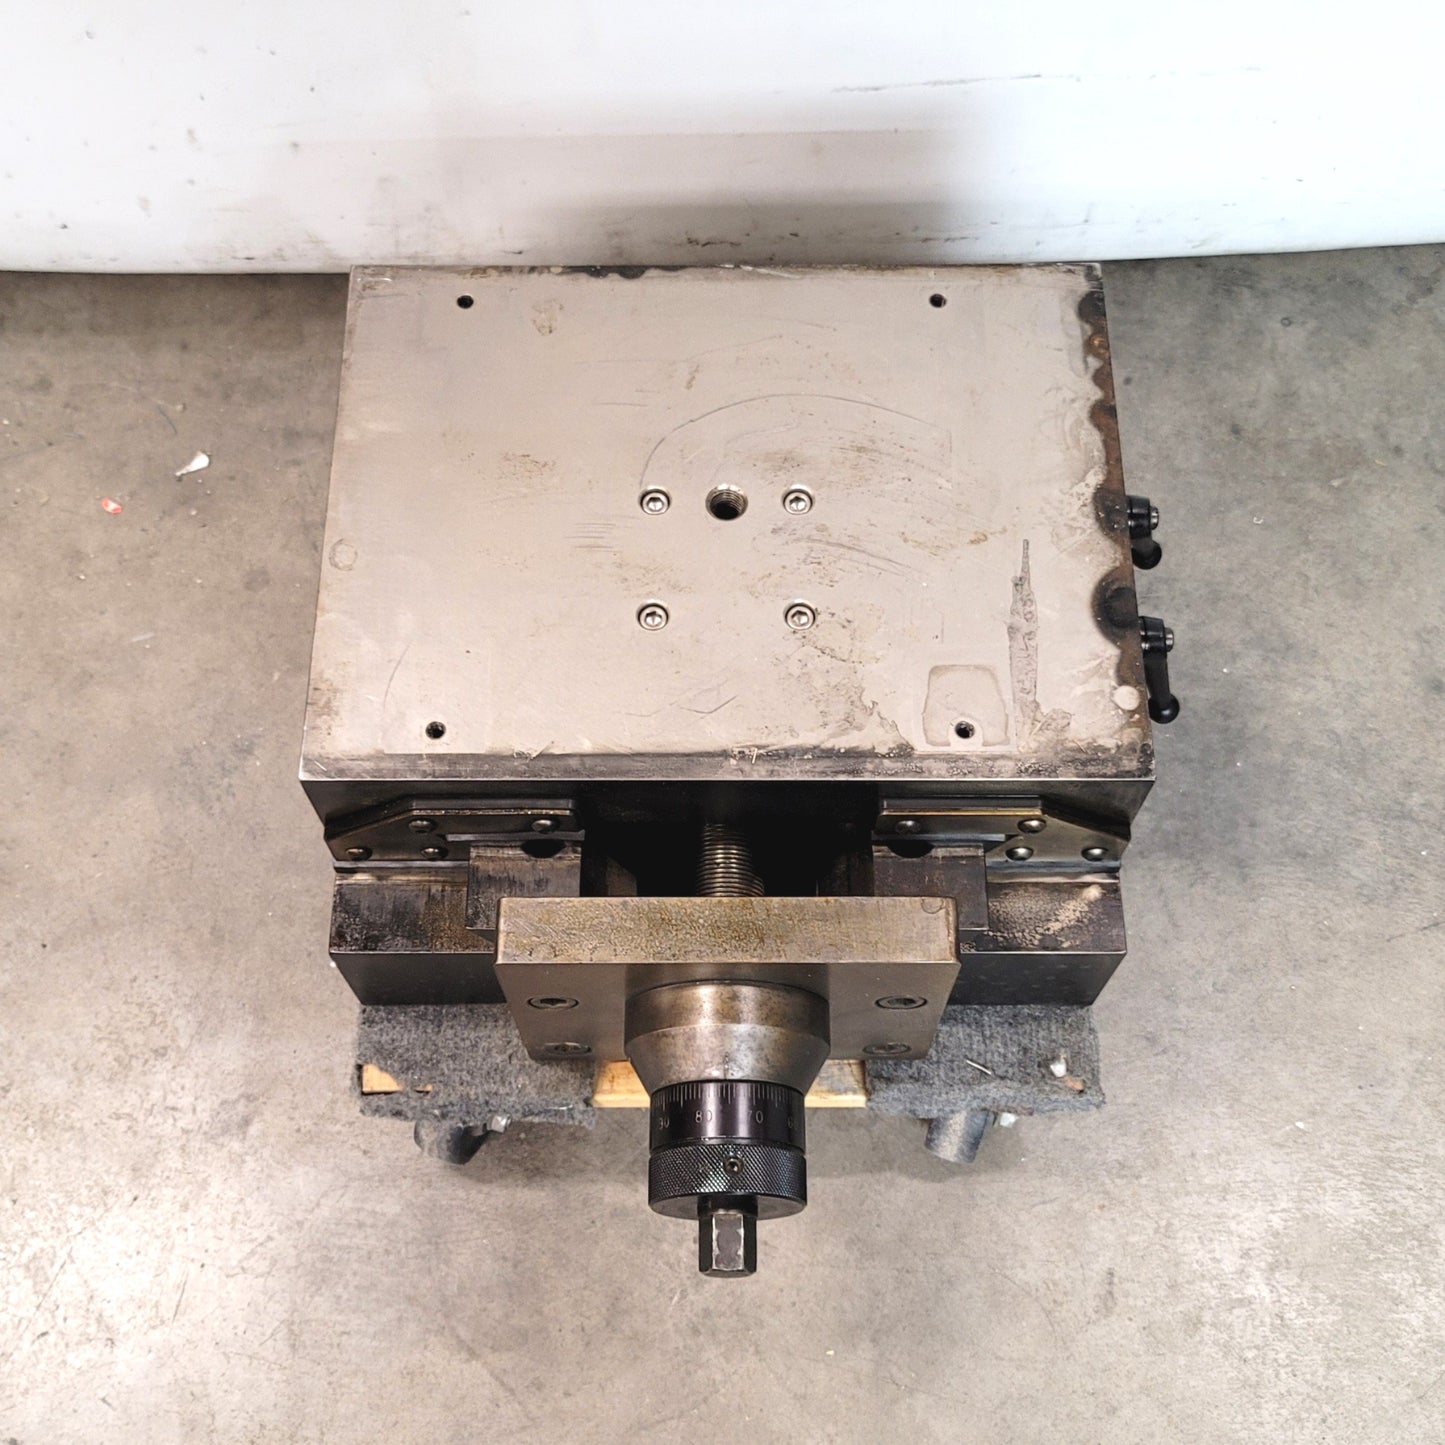 Used SKF SSK Heavy Duty Dovetail Manual Linear Positioner 12" x 16" Table 2" Travel